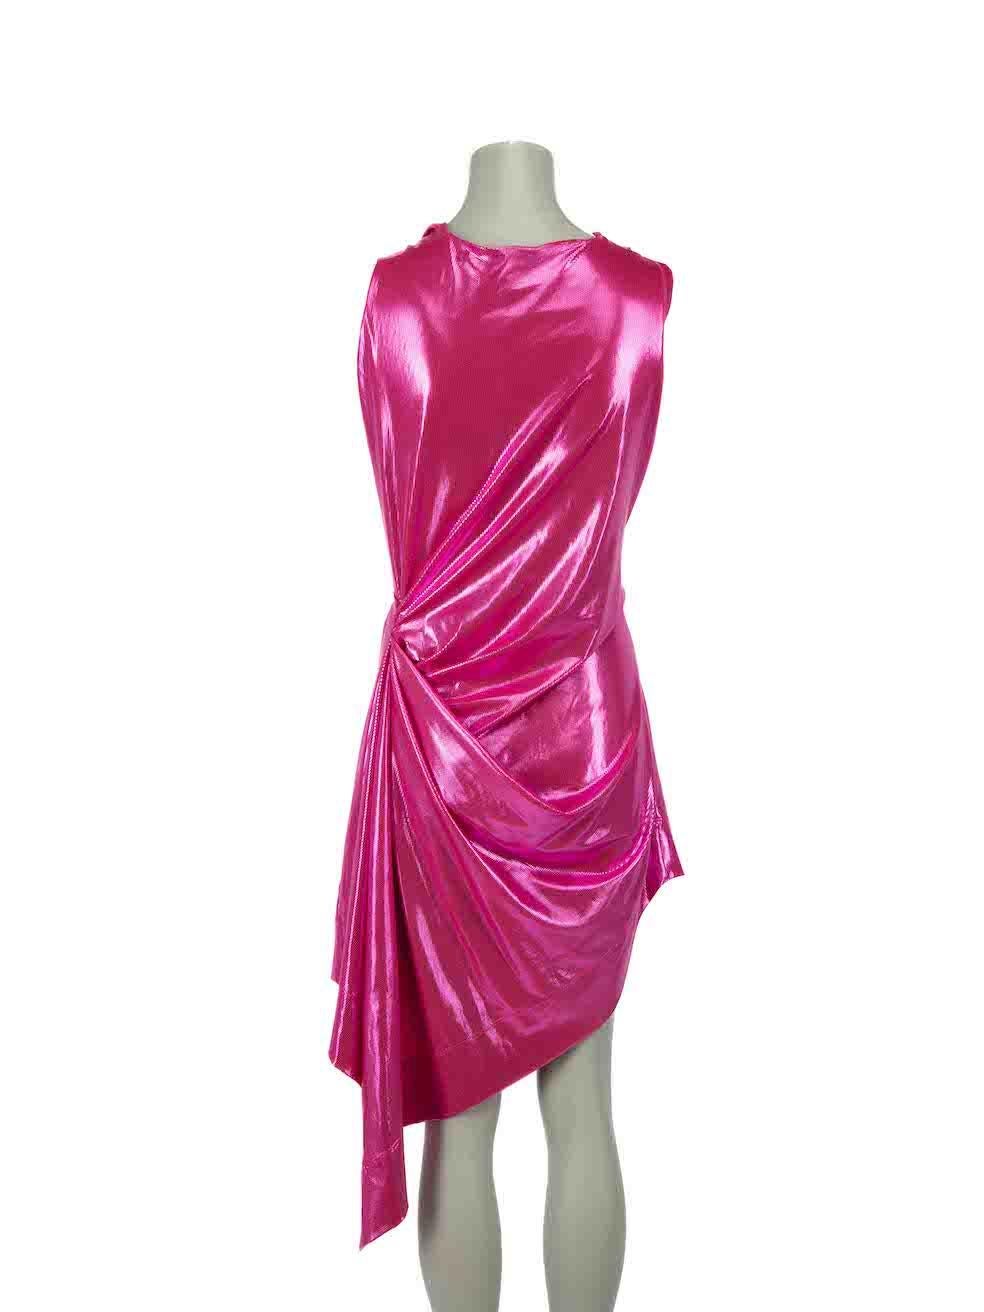 Vivienne Westwood Vivienne Westwood Red Label Pink Metallic Cowl Neck Dress In Excellent Condition In London, GB